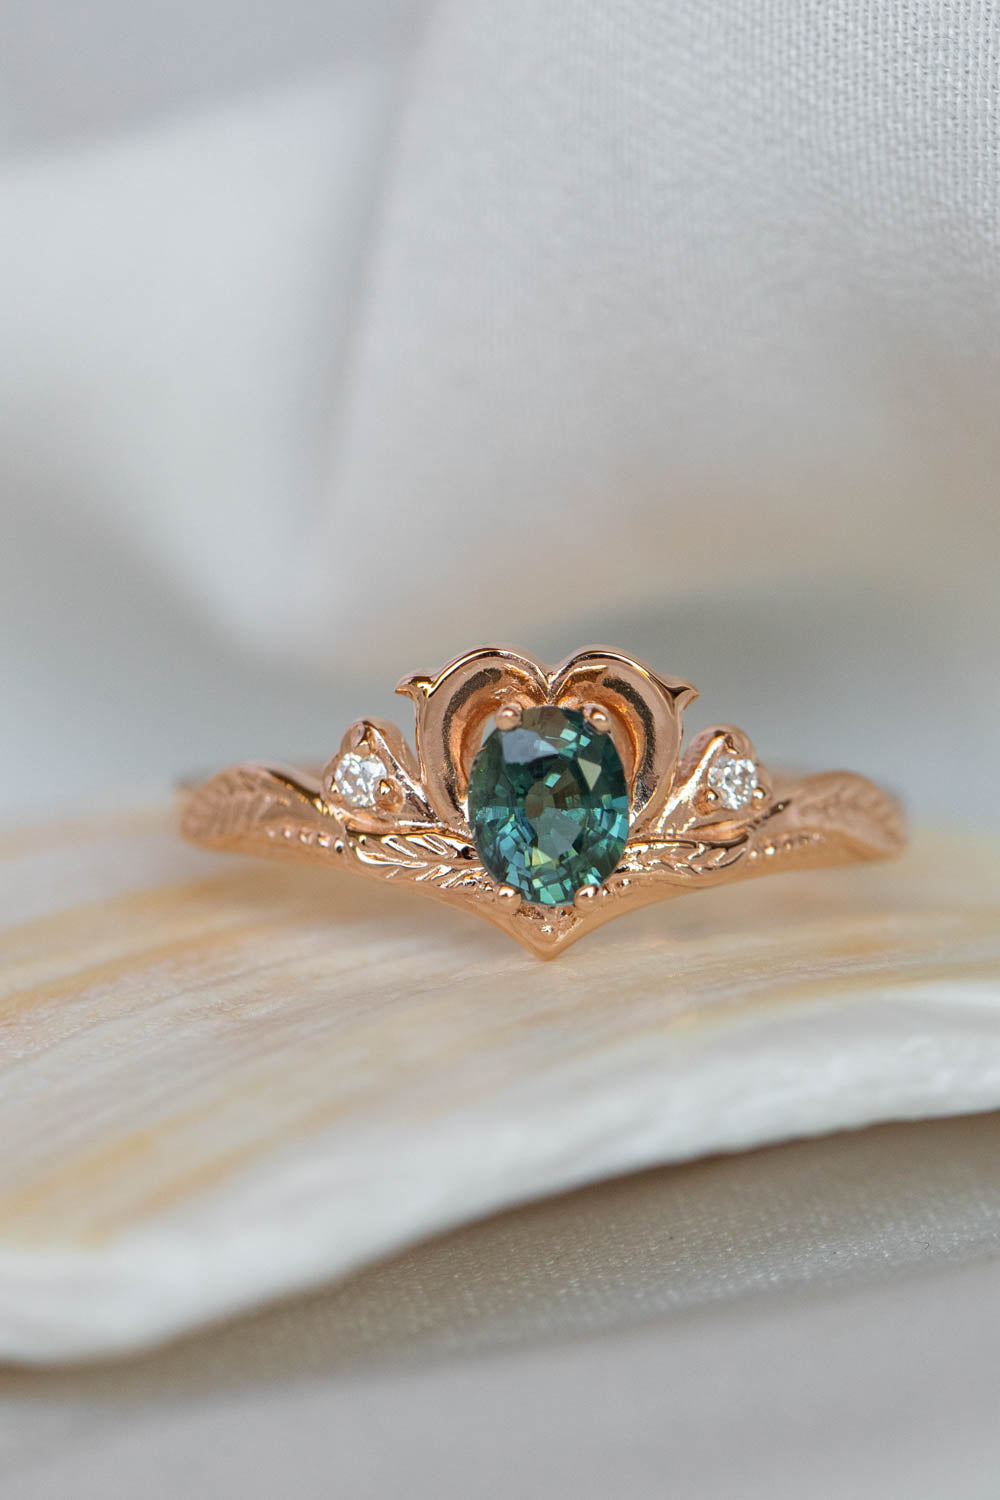 Genuine teal sapphire engagement ring, heart and diamond proposal ring / Amura - Eden Garden Jewelry™